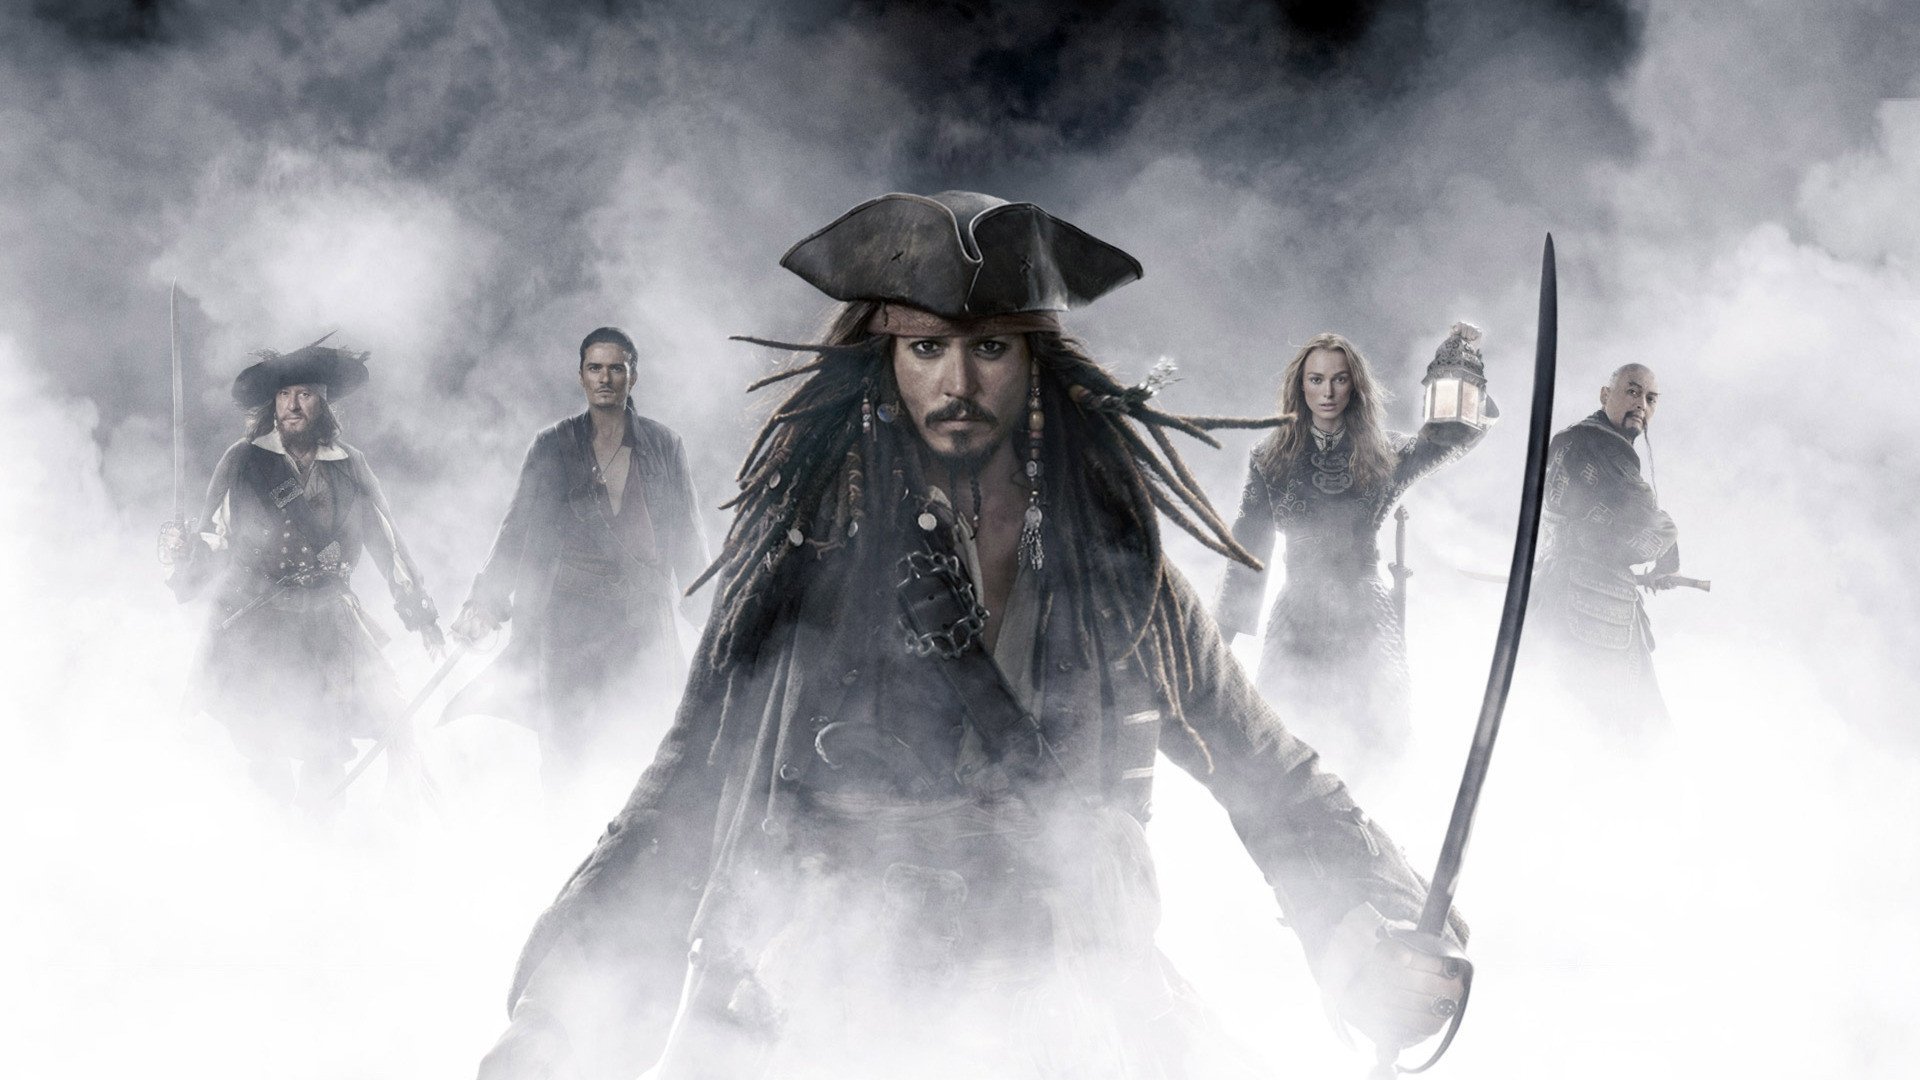 Pirates Of The Caribbean wallpapers 1920x1080 Full HD (1080p) desktop  backgrounds